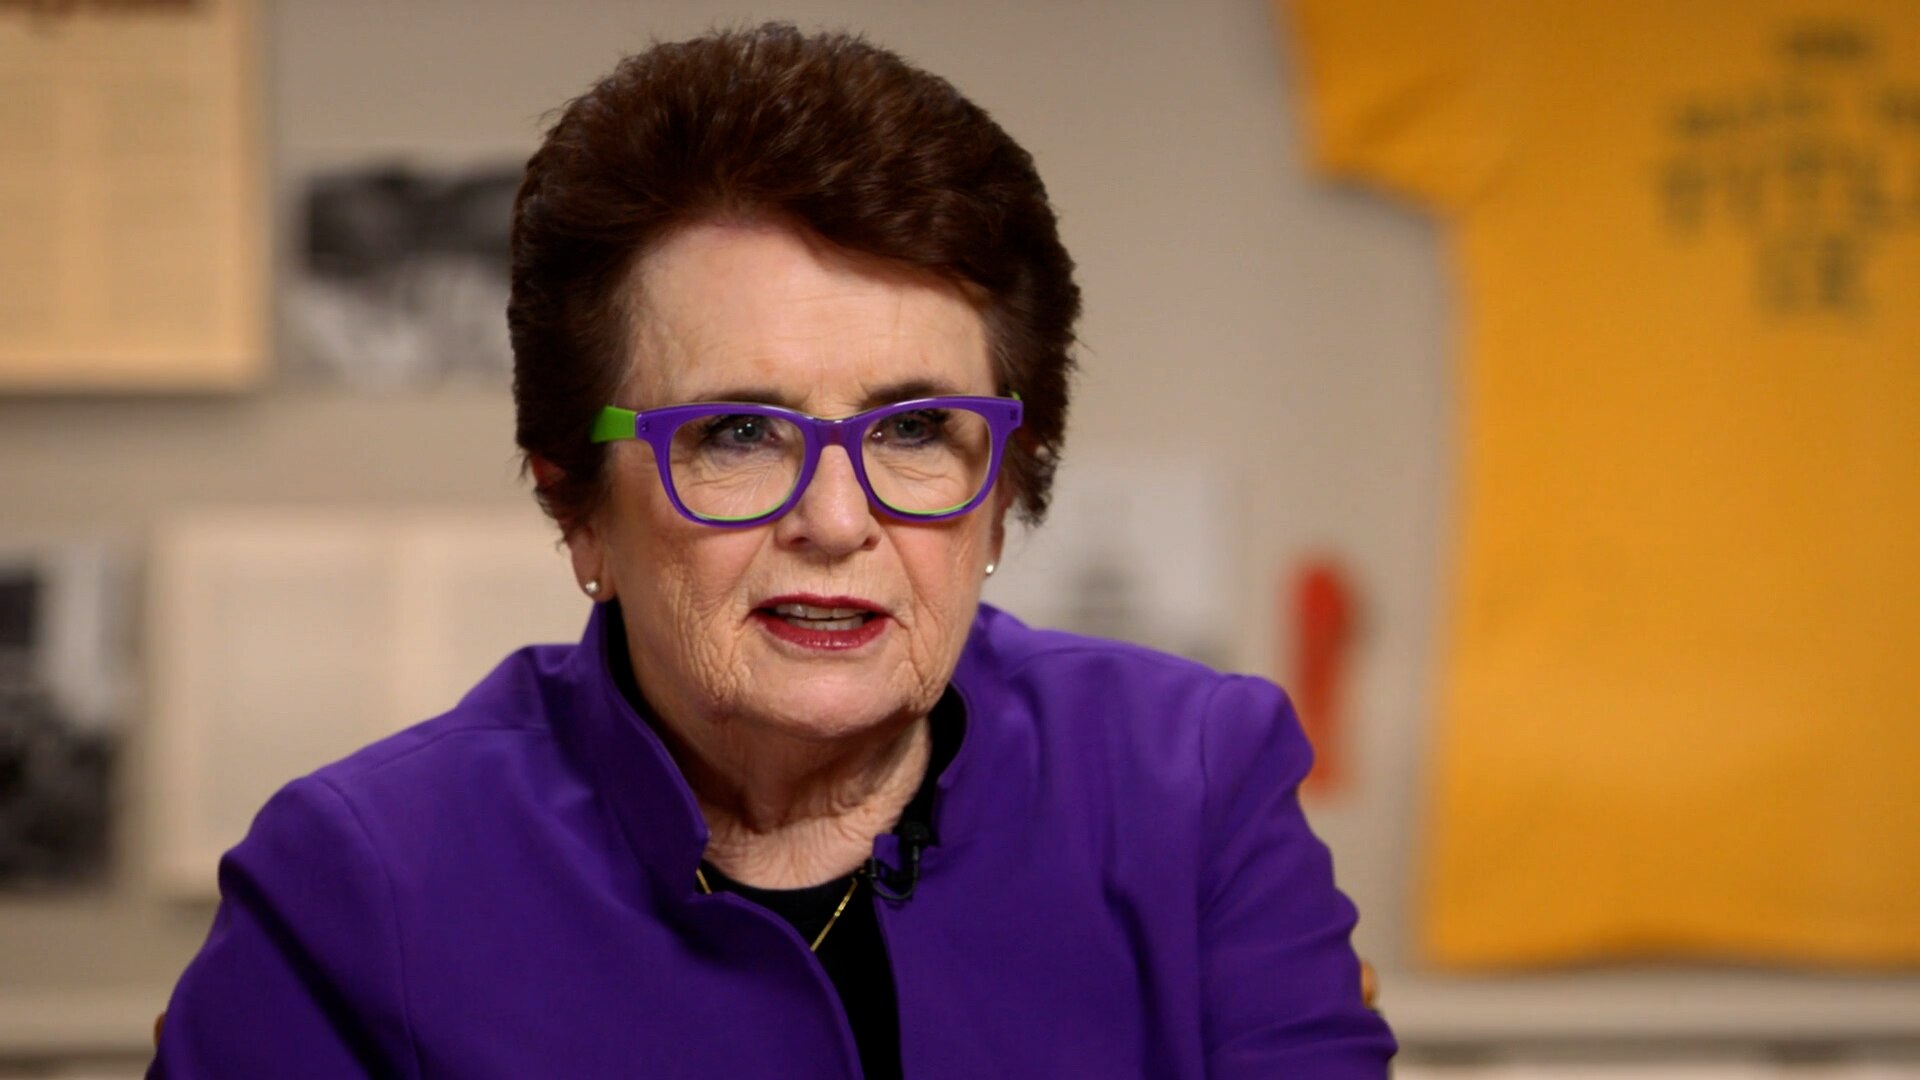 Watch NBC Nightly News with Lester Holt Excerpt: Billie Jean King ...